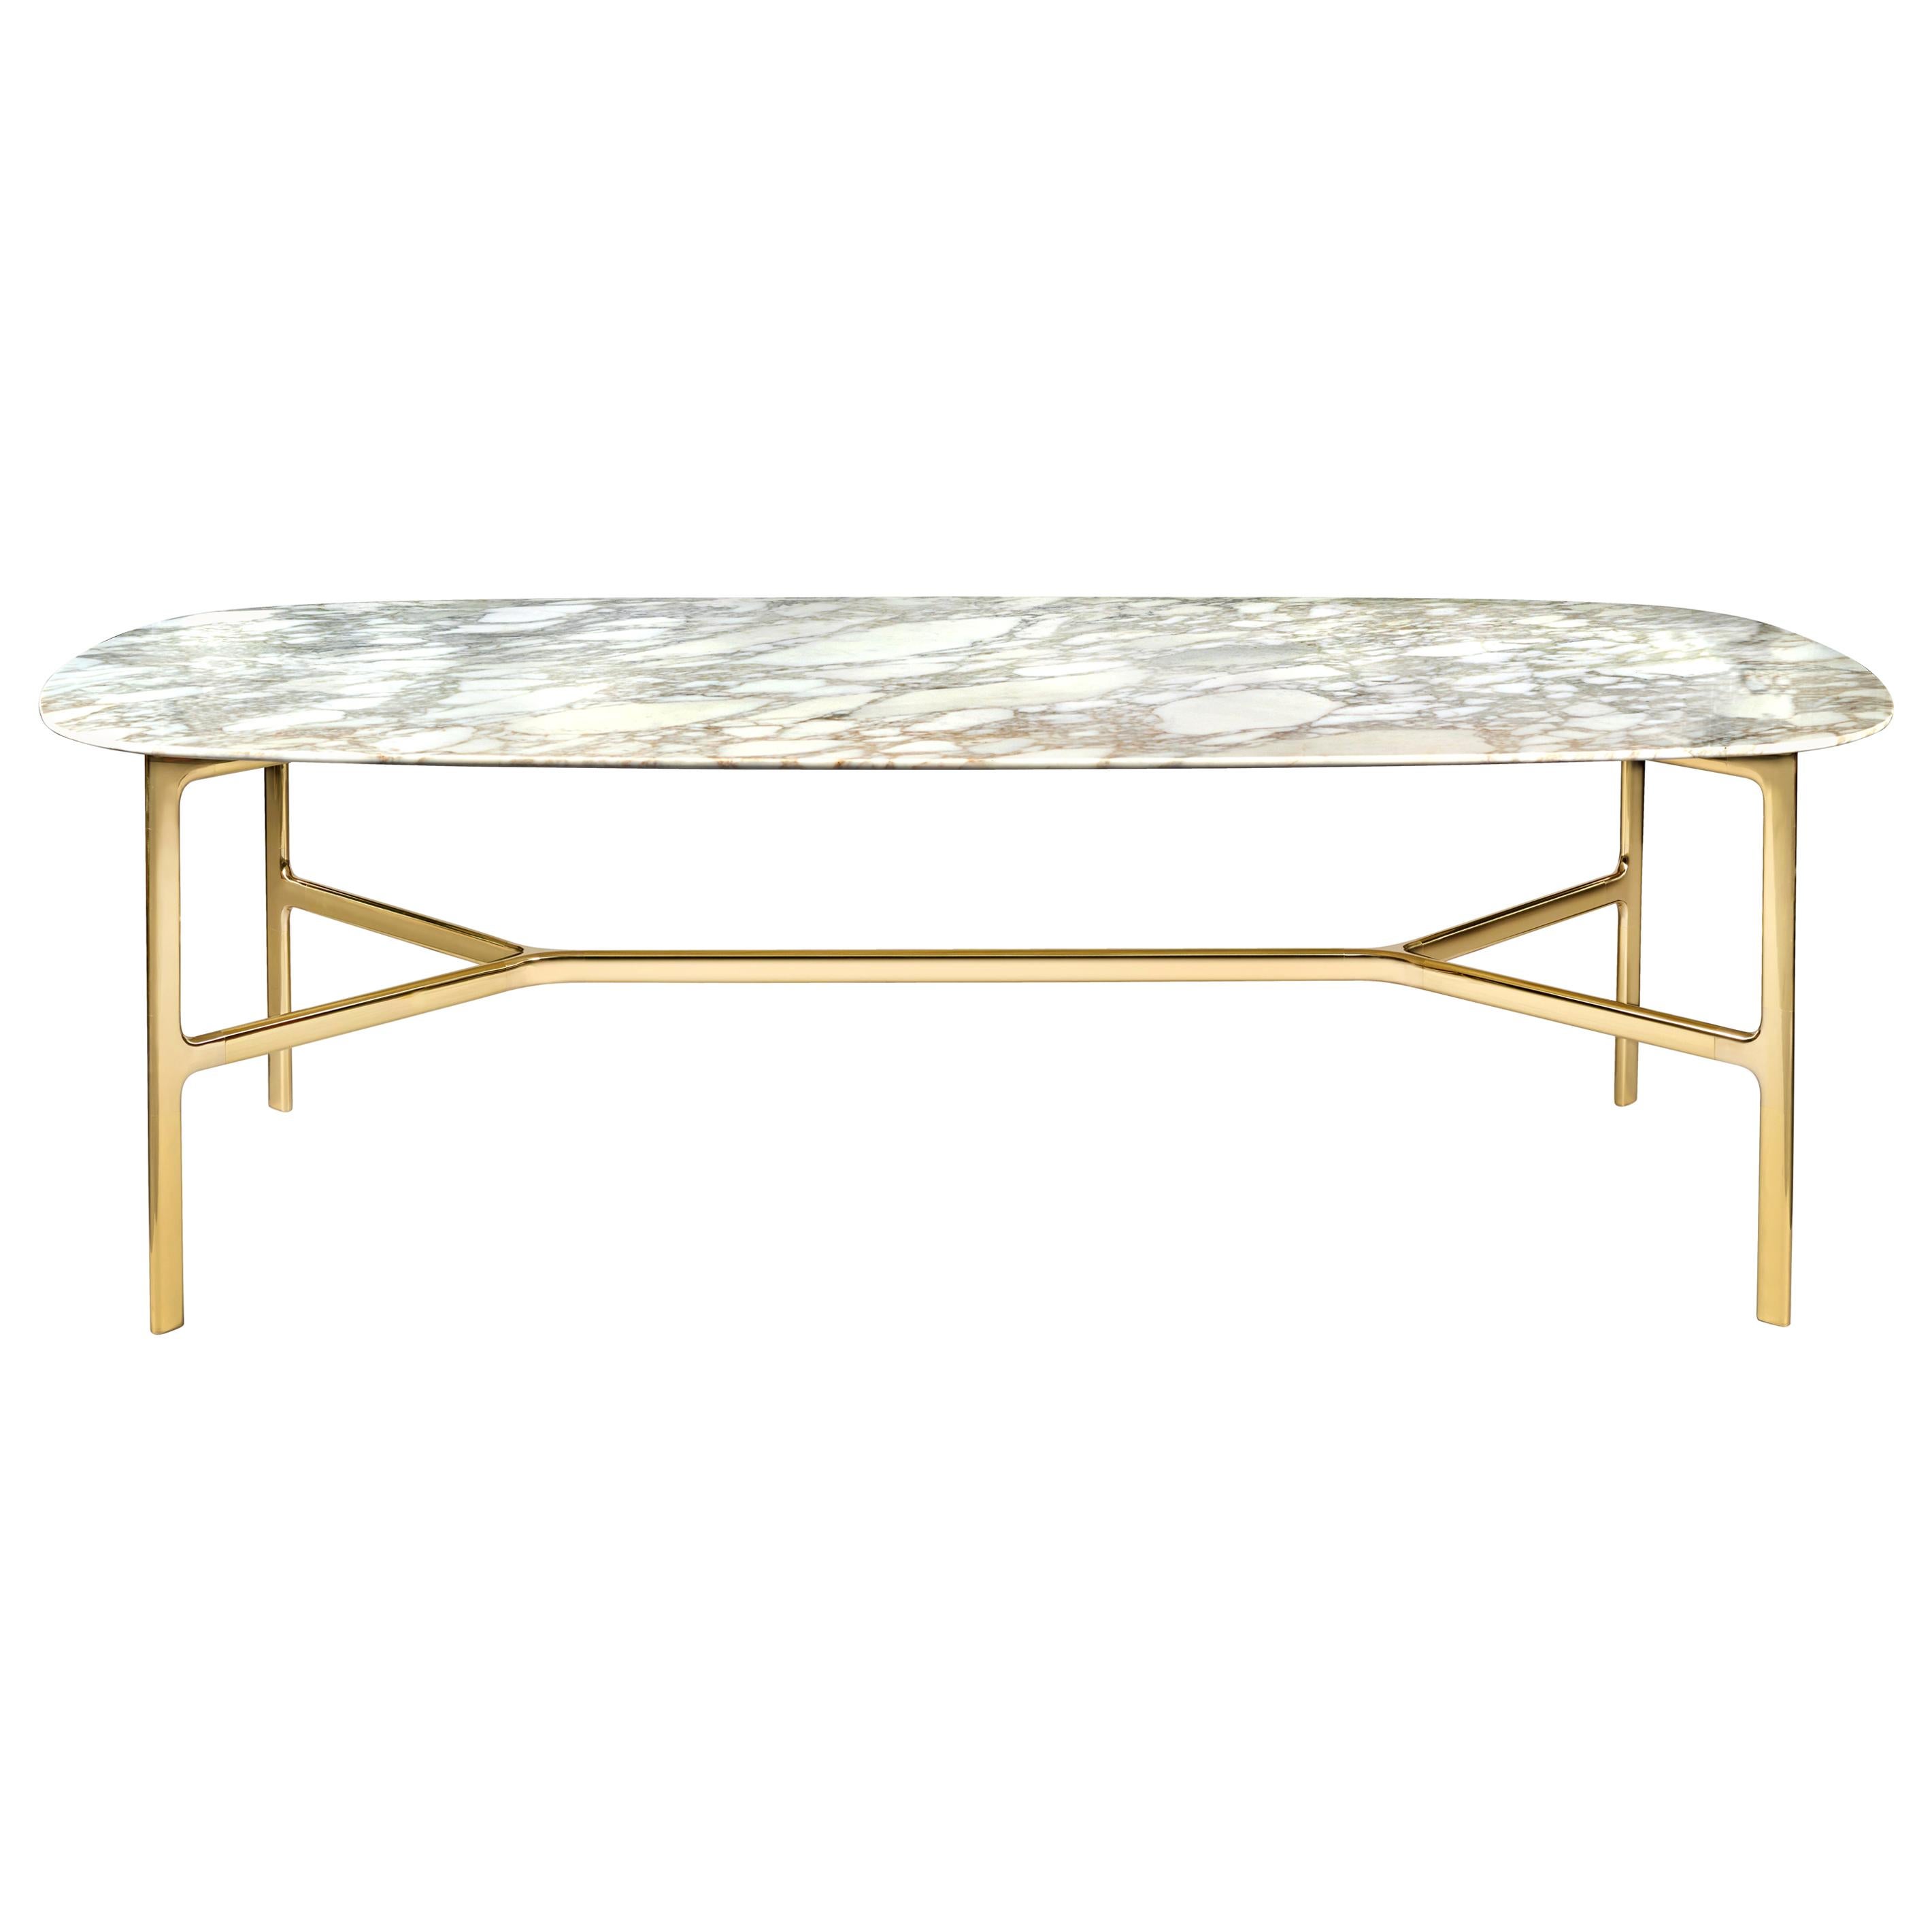 Coast Dining Table in Calacatta Gold Marble Top with Polished Brass Legs, Branch For Sale